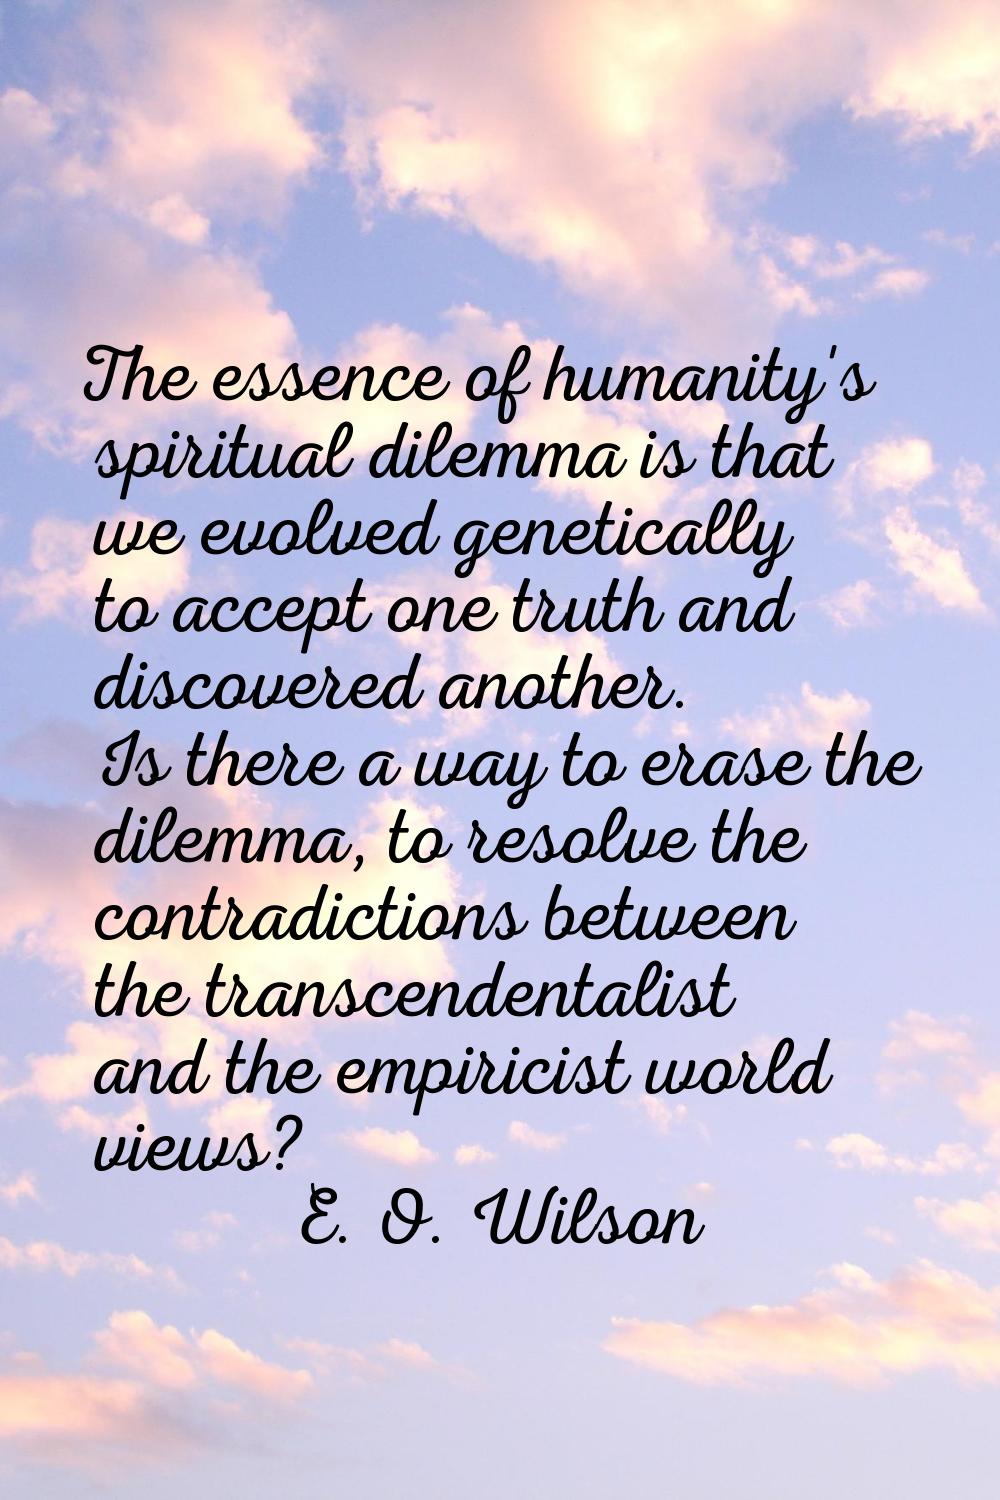 The essence of humanity's spiritual dilemma is that we evolved genetically to accept one truth and 